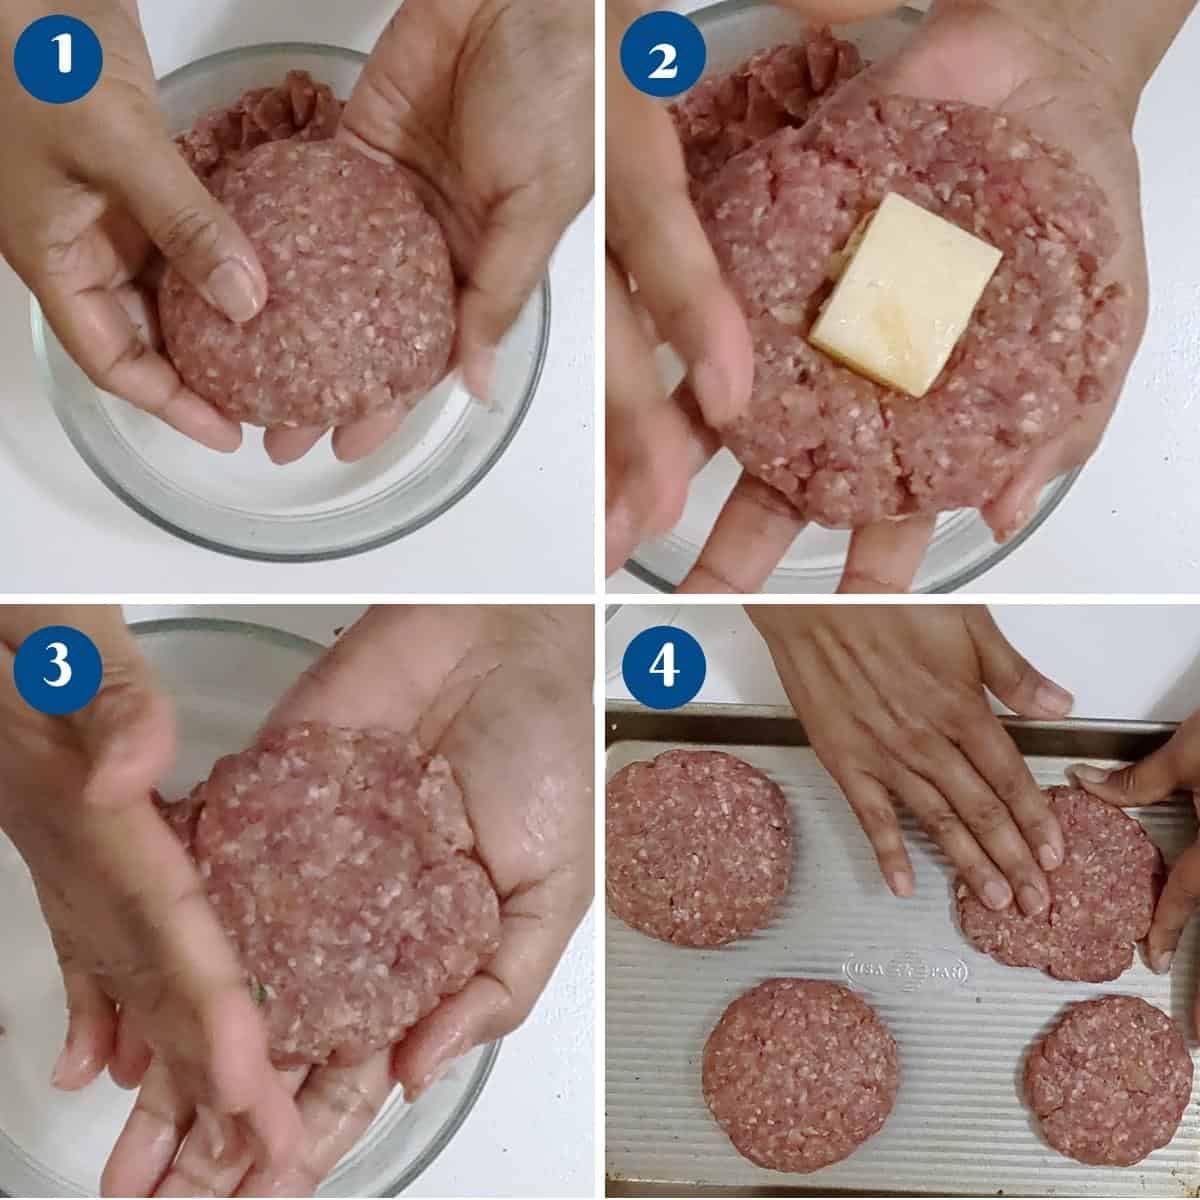 Progress pictures shaping the burgers.